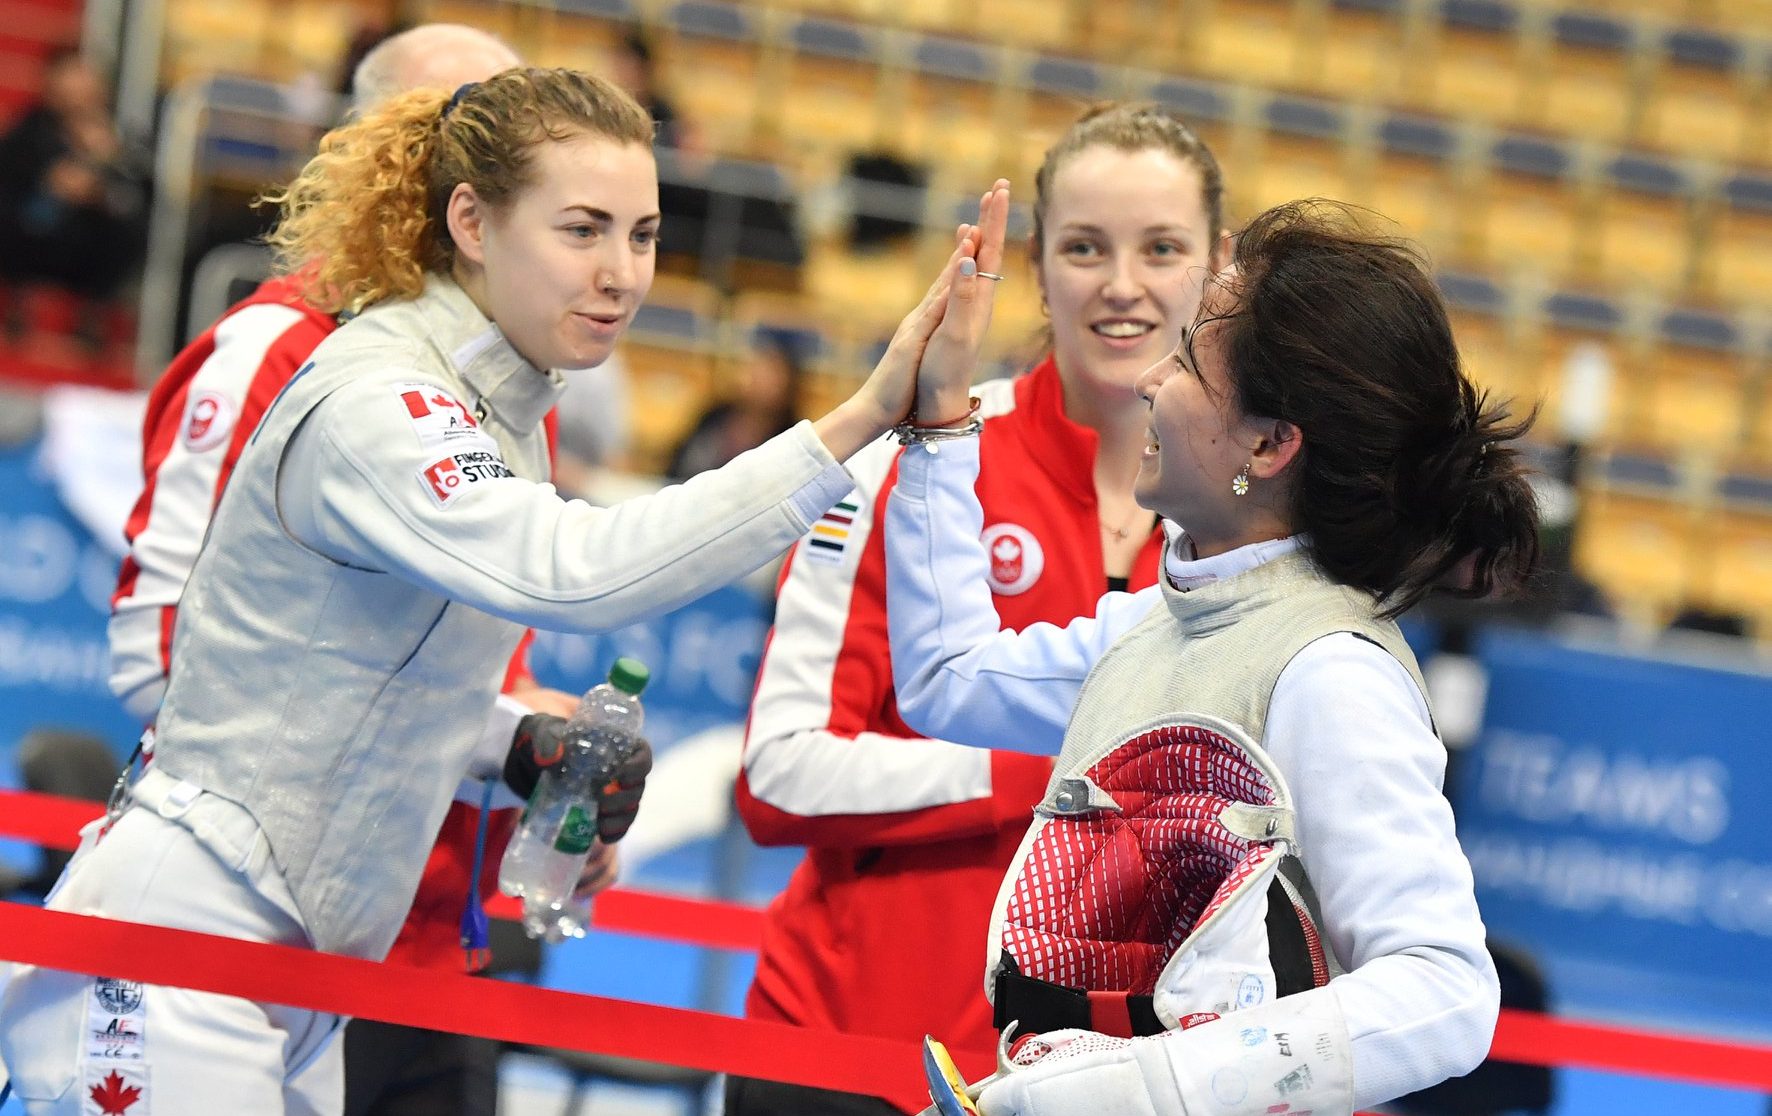 Canadian women qualify Canada for Tokyo 2020 in Women's Team Foil on Sunday Feb 23, 2020. (photo from Fencing Canada Twitter)